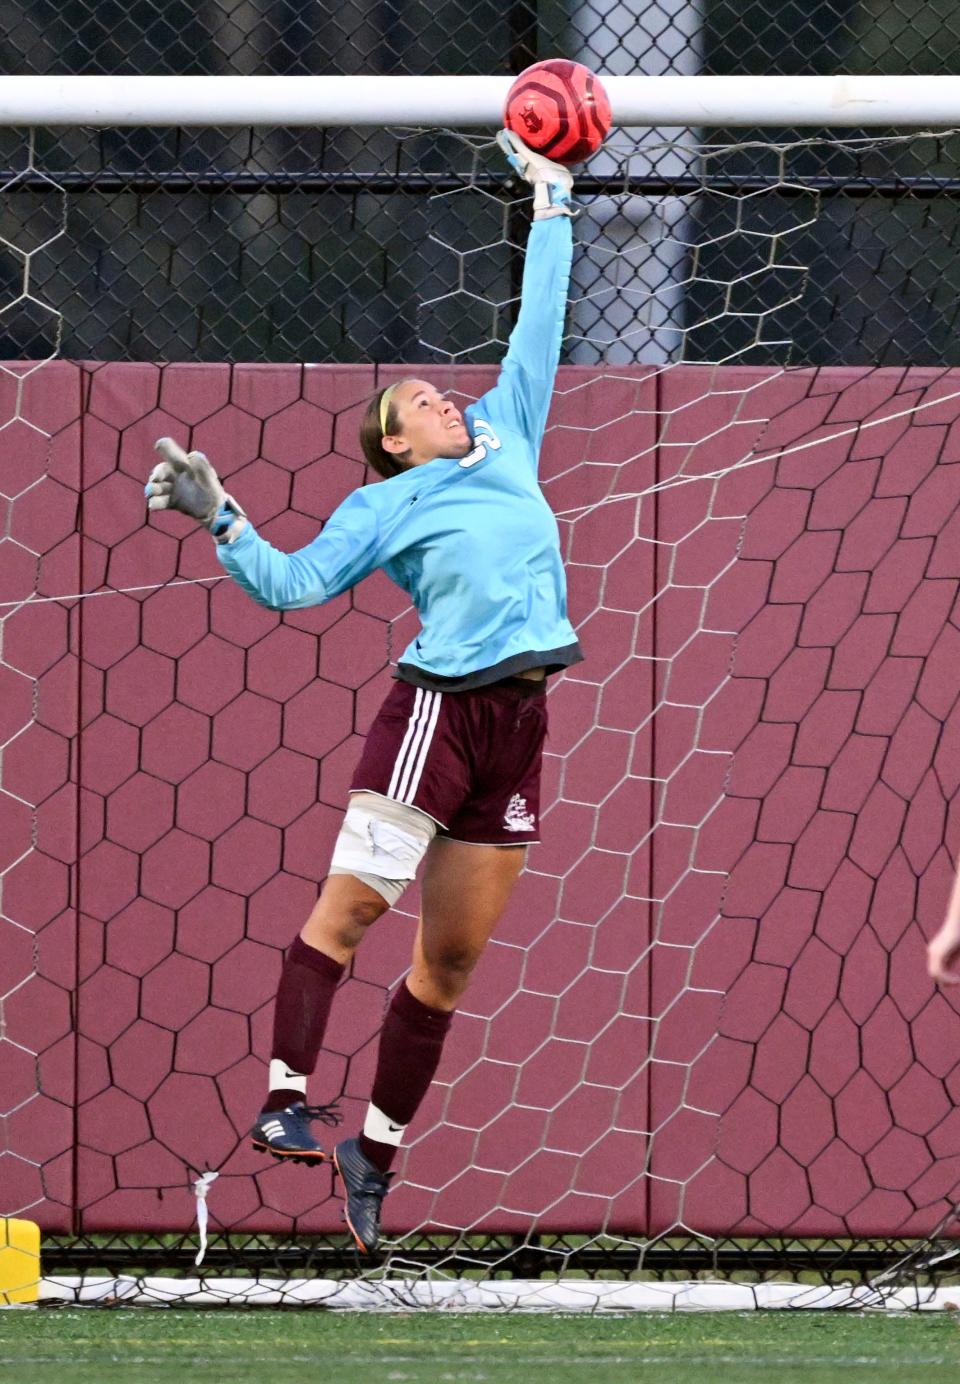 Falmouth goalie Riley Devlin deflects a Sandwich shot in the second half of the game Sandwich won 2-0.